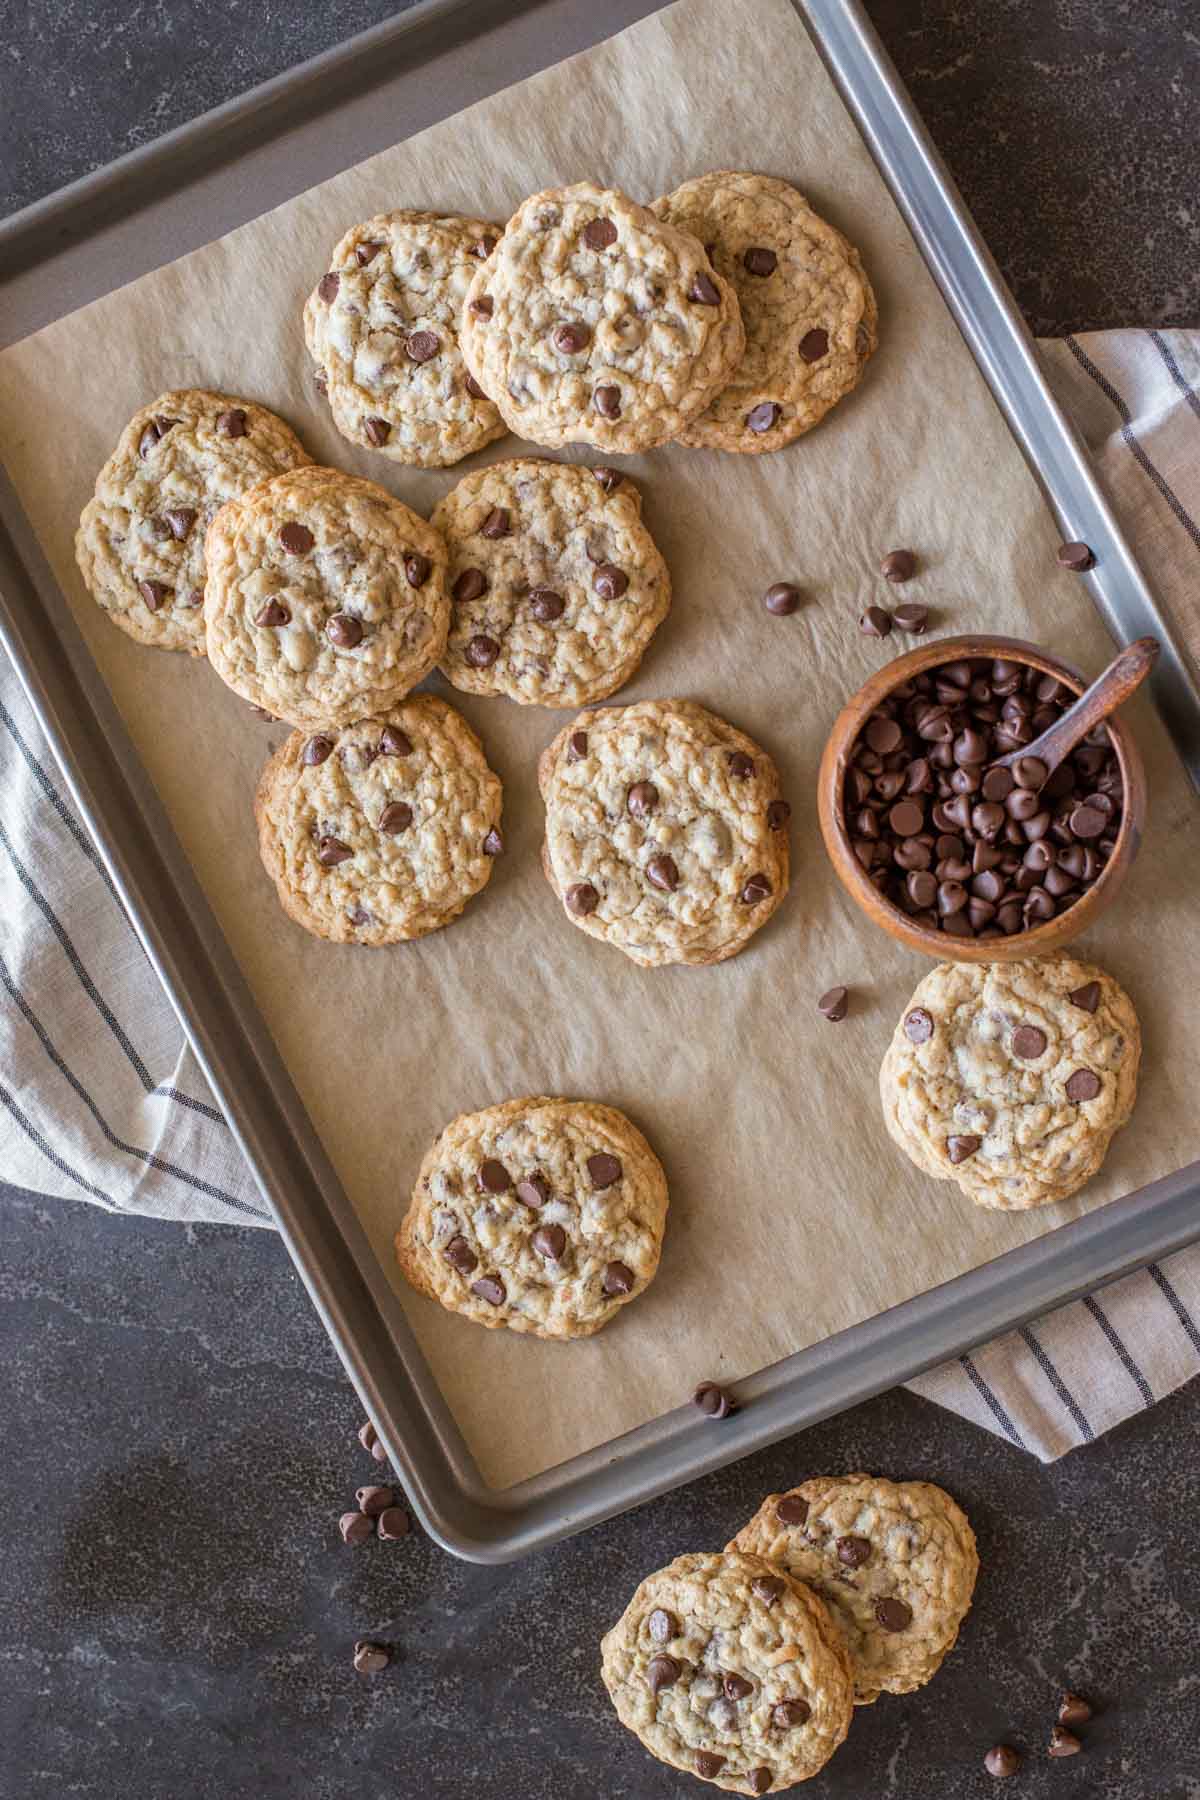 Bakery Style Oatmeal Chocolate Chip Cookies on a parchment paper lined baking sheet, along with a small wood bowl of chocolate chips, and two cookies sitting next to the baking sheet. 